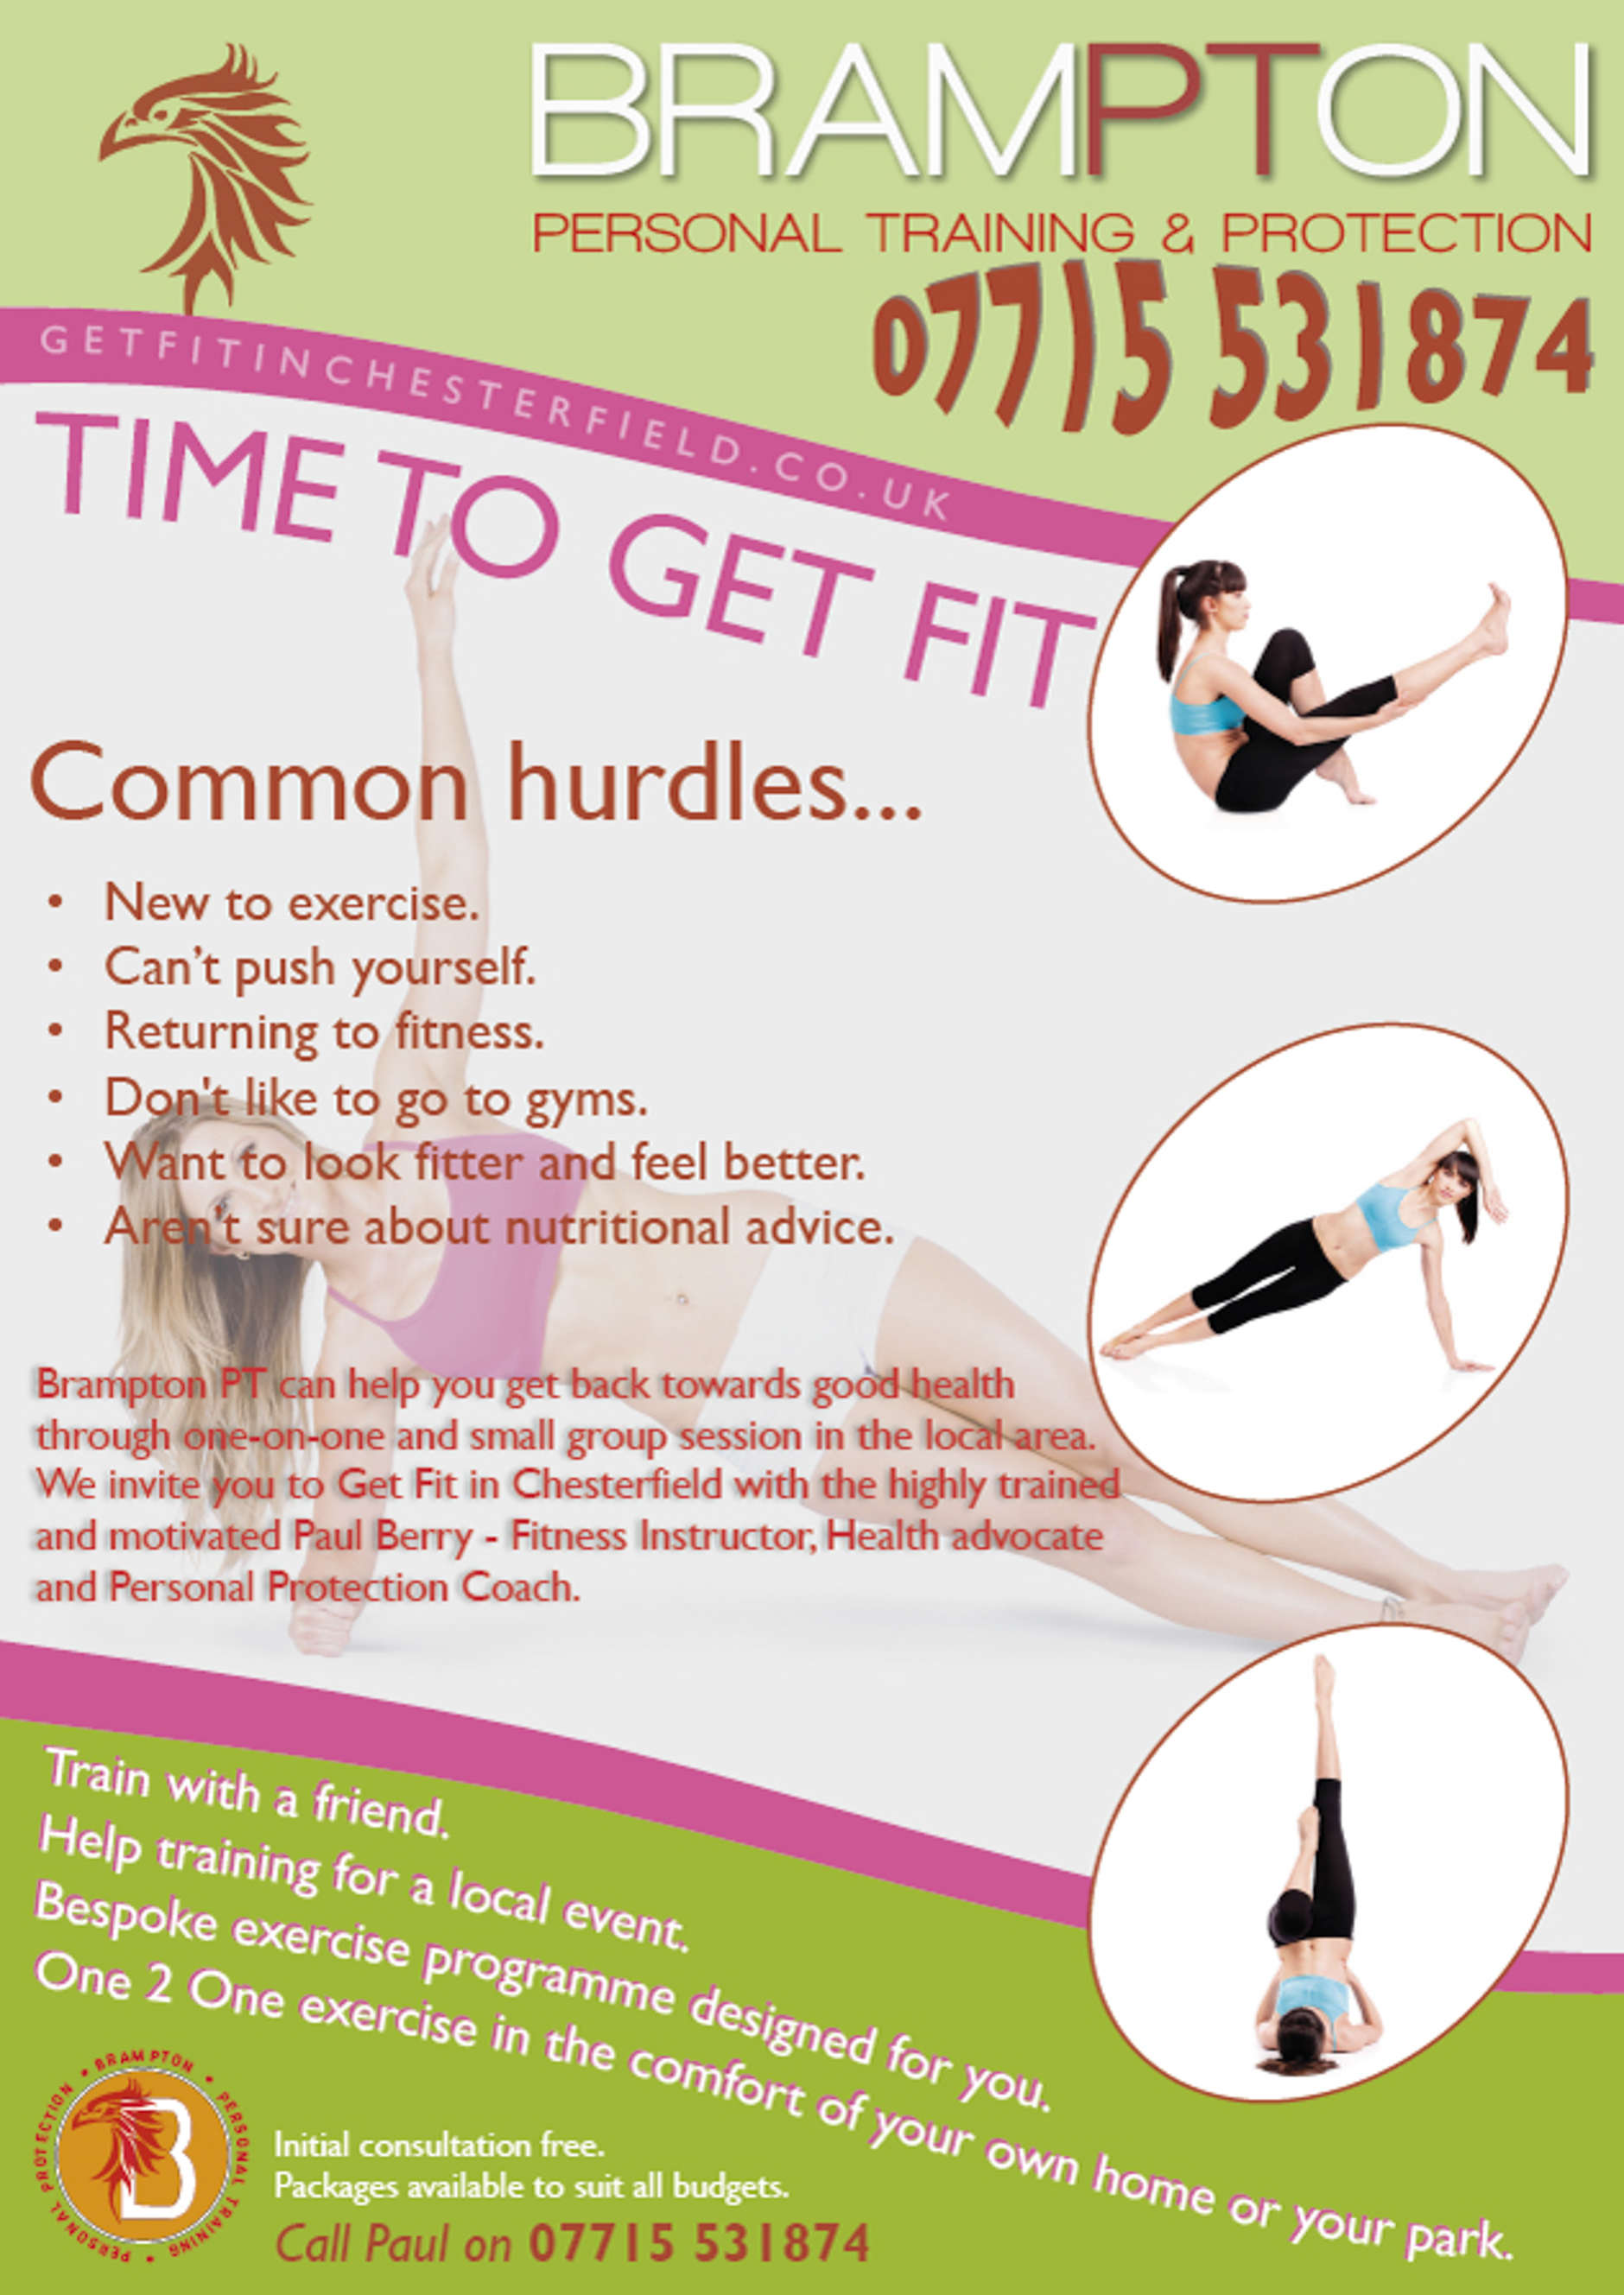 Annual Leaflet for Fitness Trainer based in Chesterfield